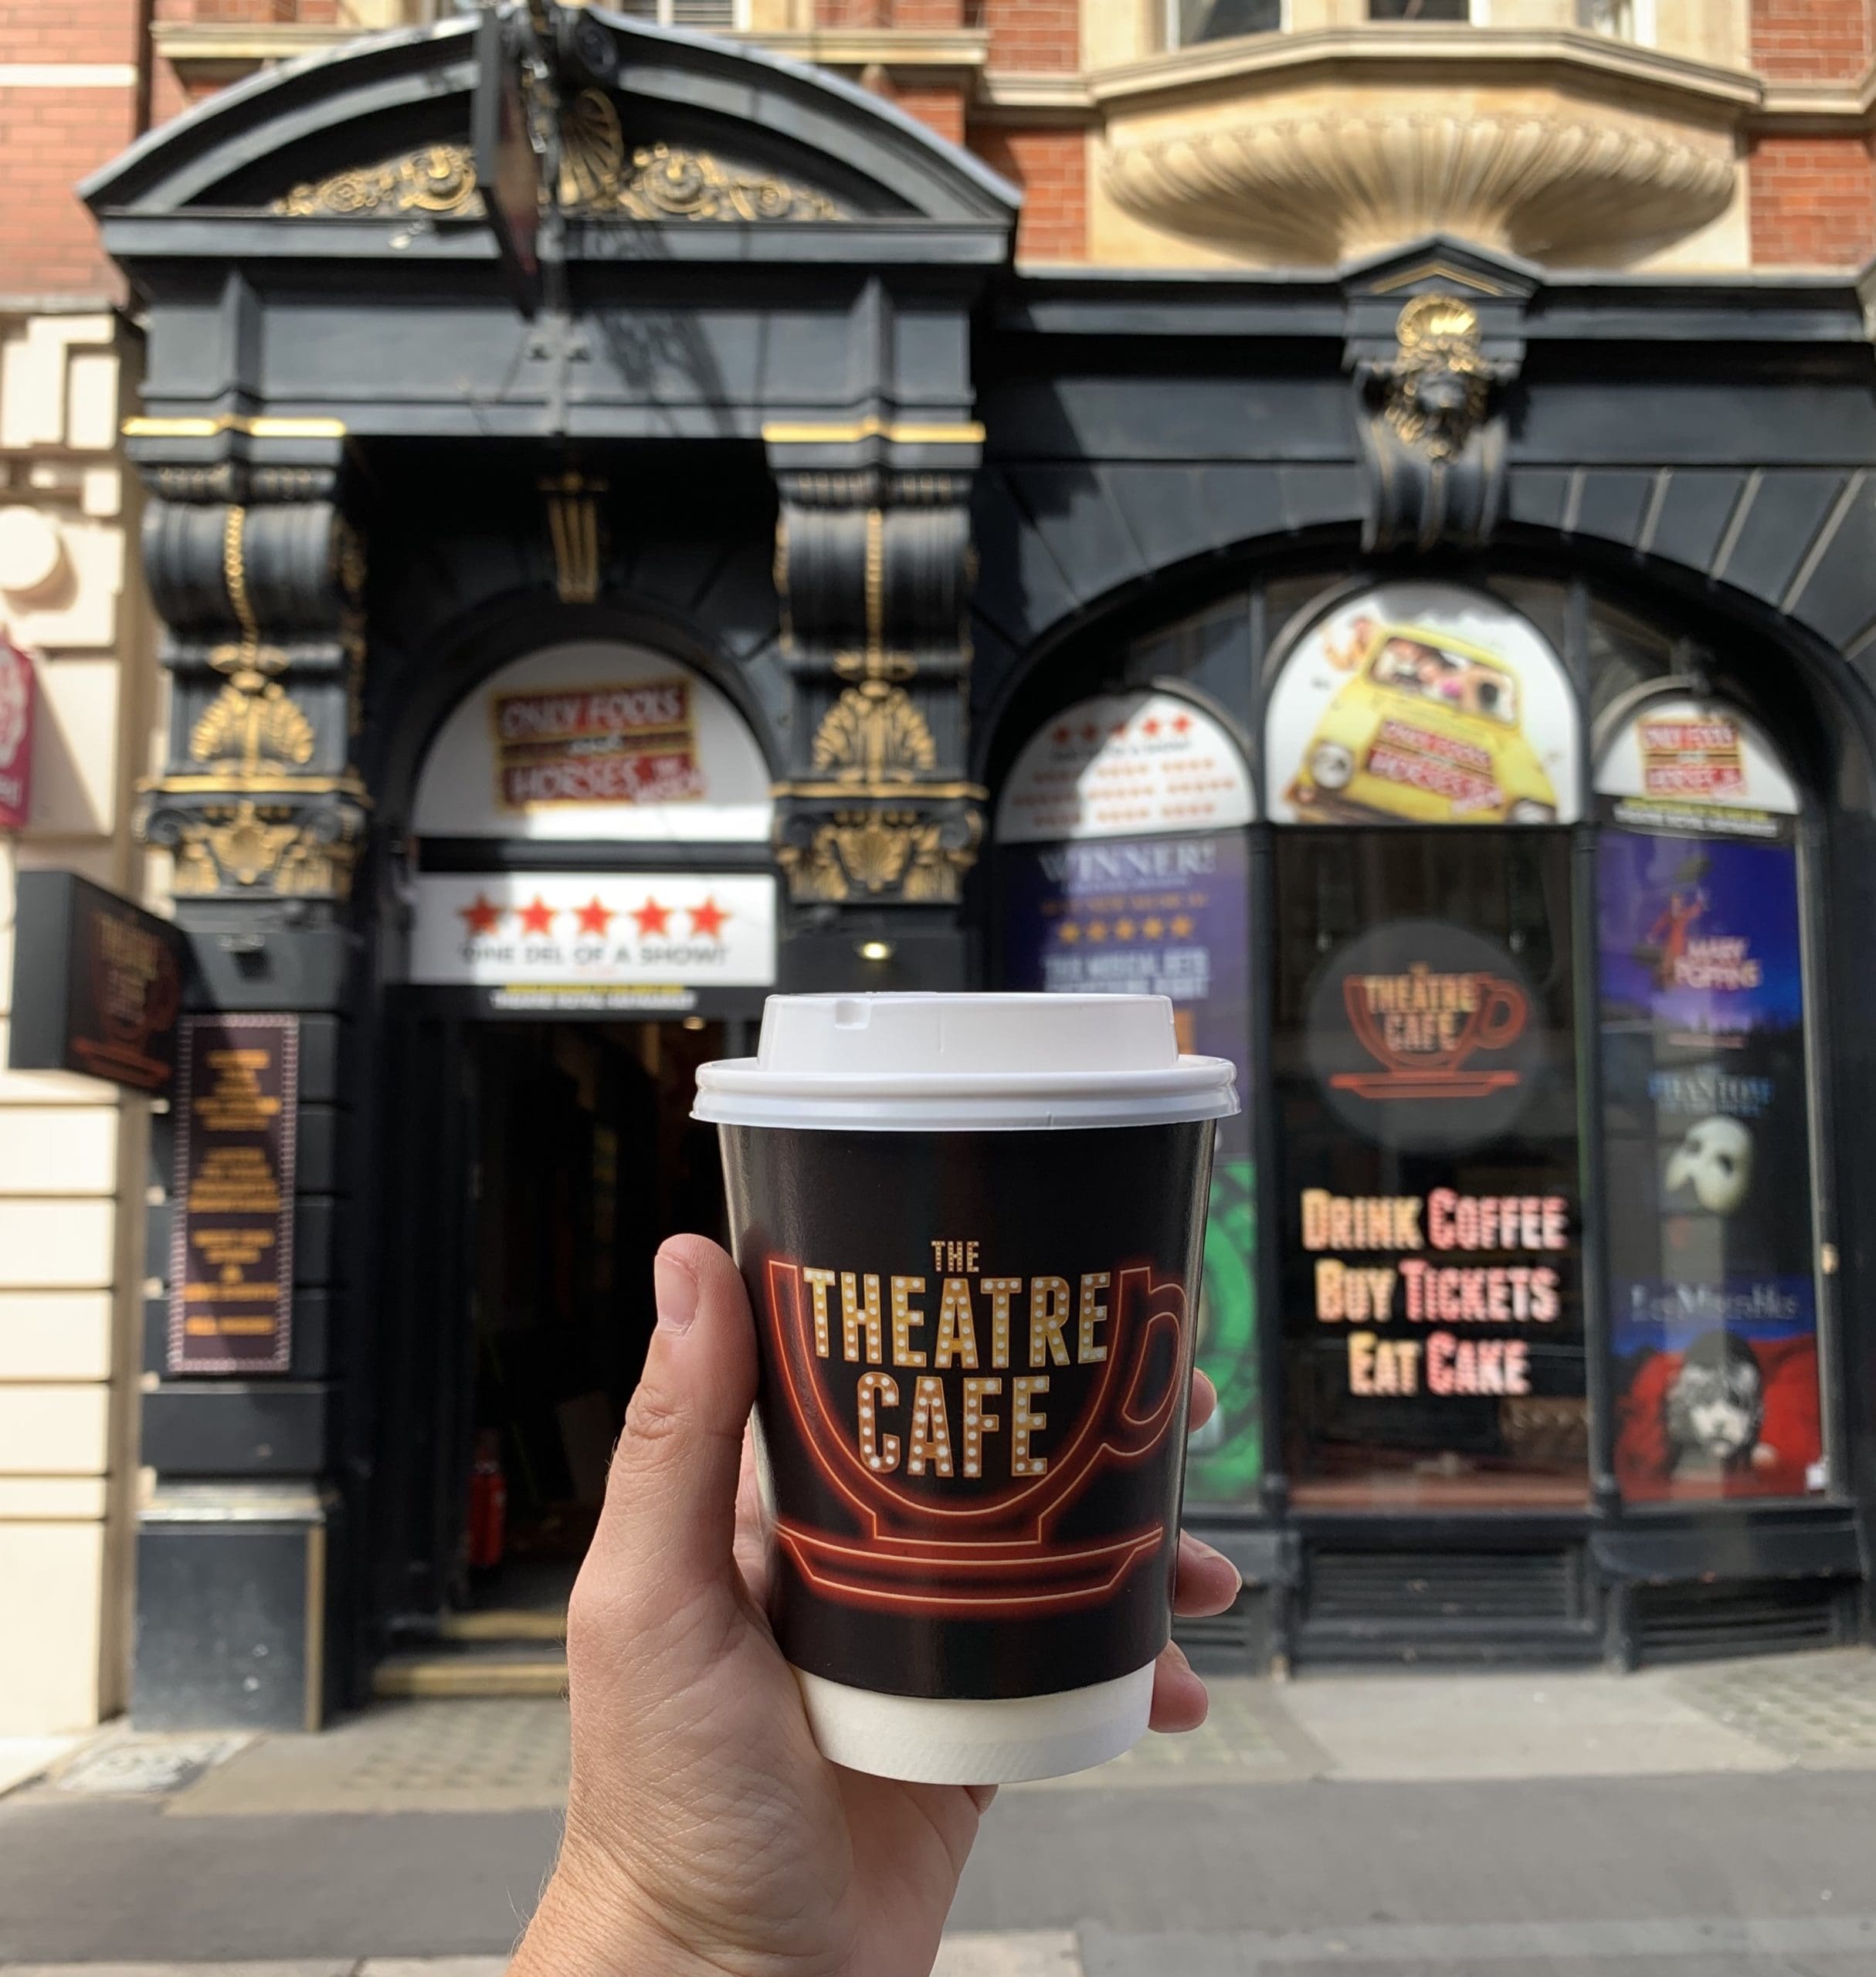 The Theatre Café is set to reopen on the 1st August 2020!